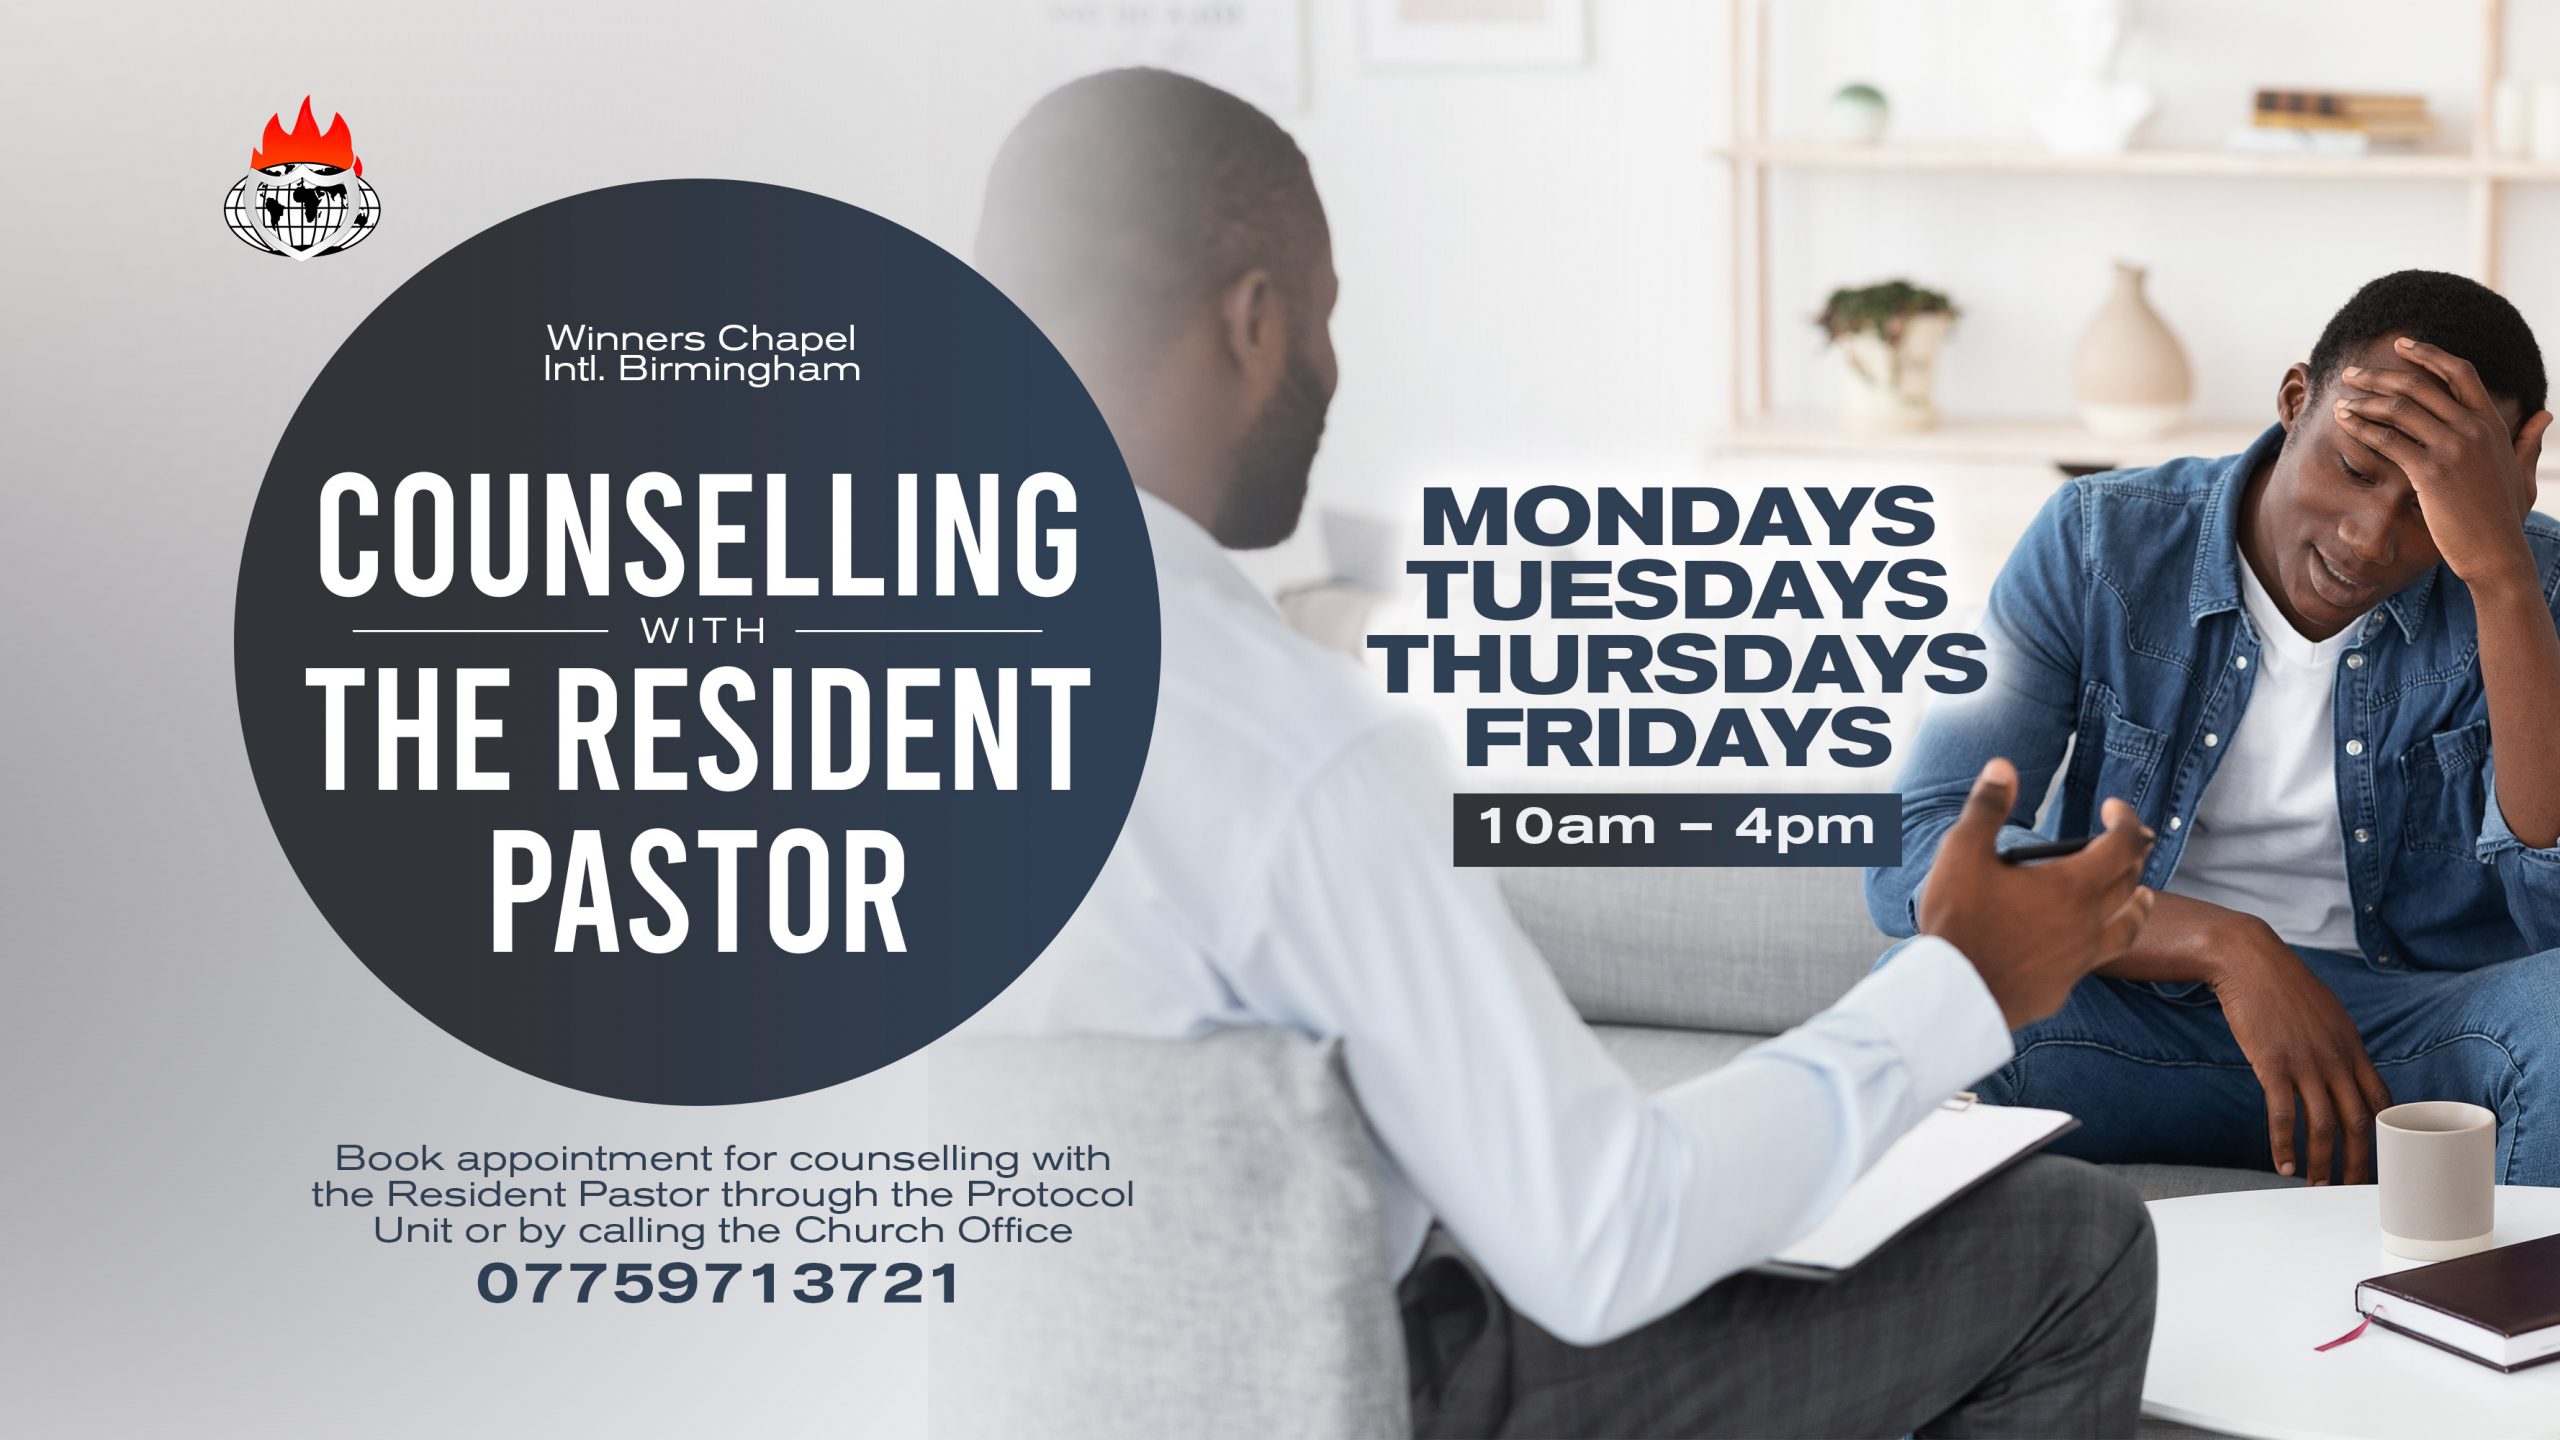 Counselling-with-the-Resident-Pastor-Bham